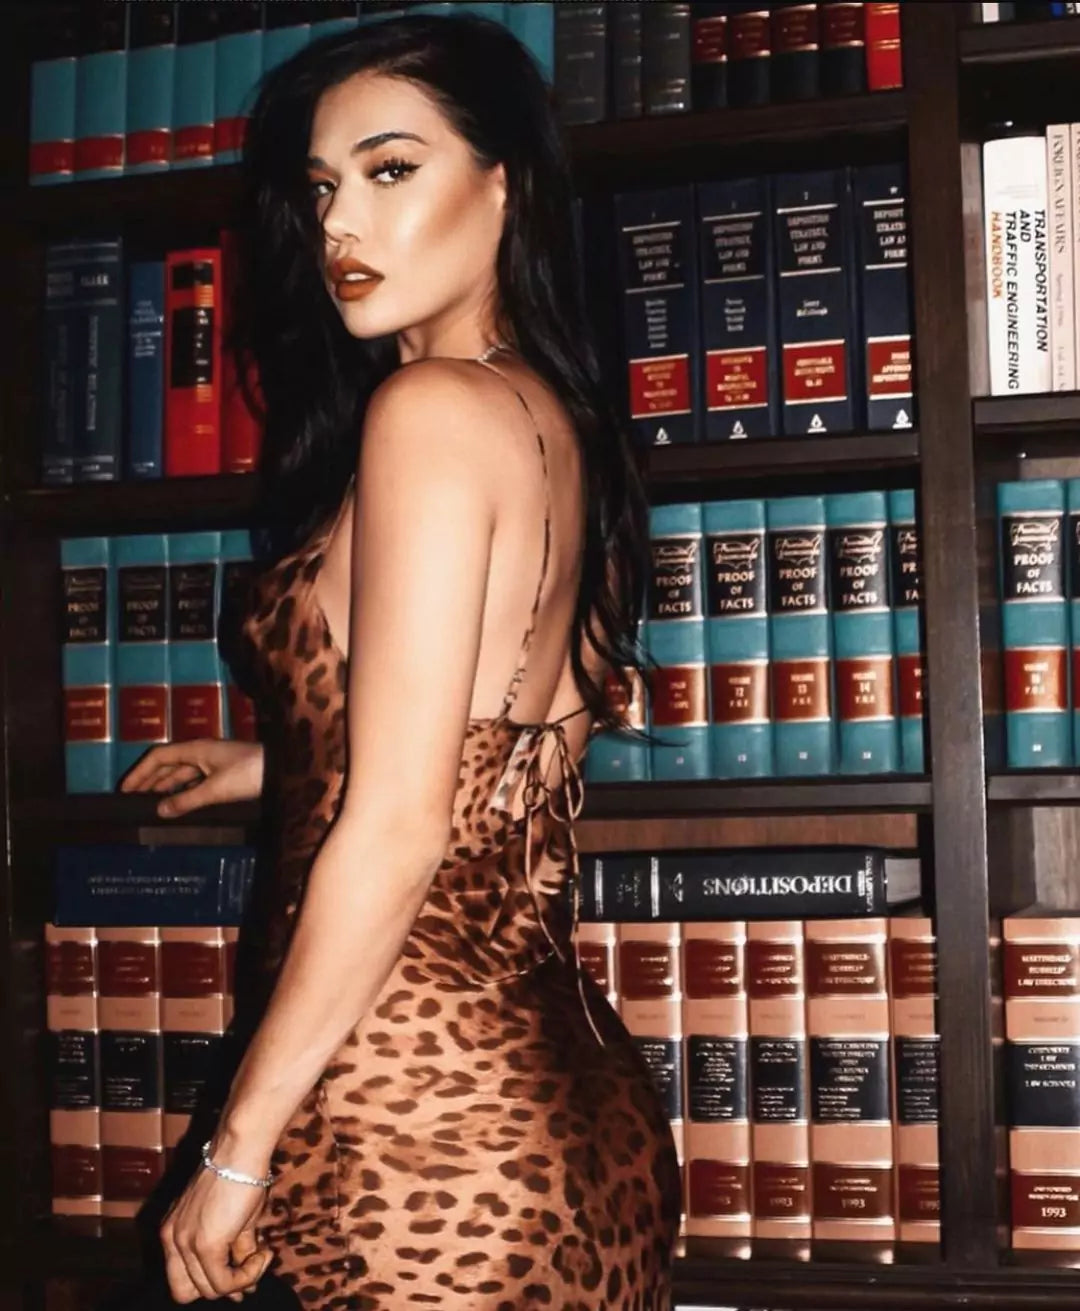 A woman in a leopard print dress making a style statement in front of bookshelves.